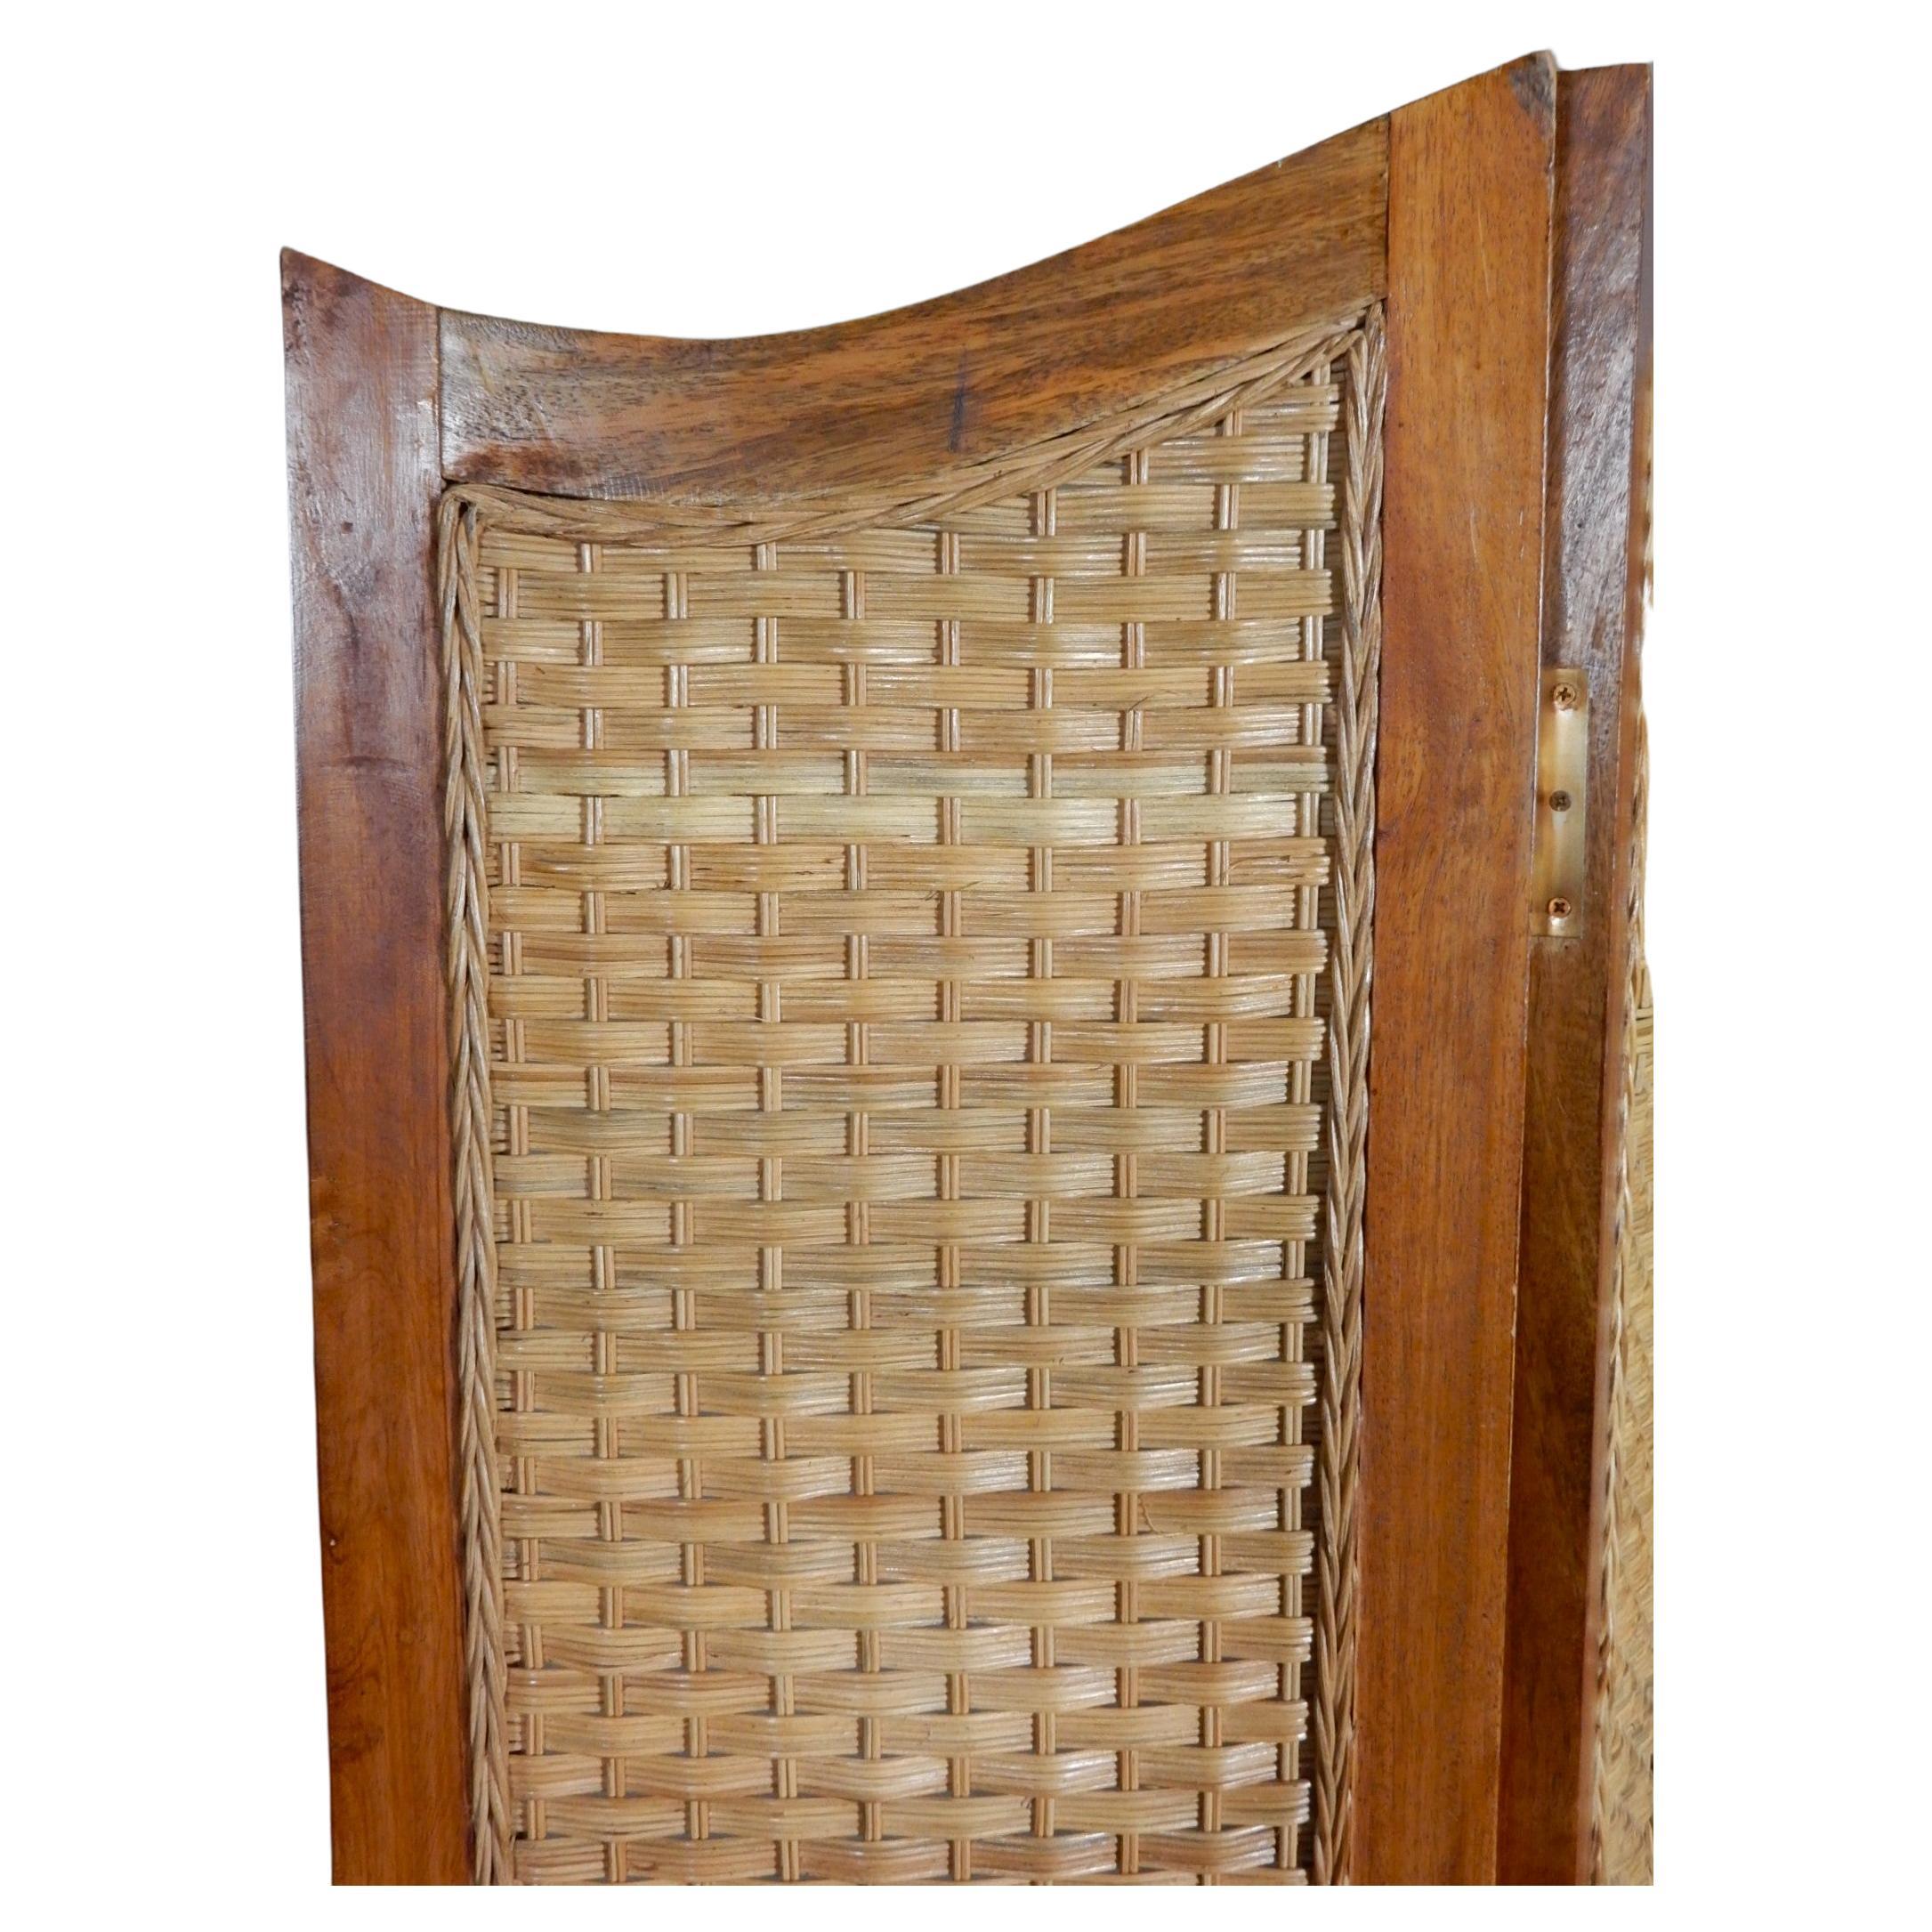 Late 20th Century Mexican Modernism Woven Cane Rattan Screen Room Divider after Clara Porset For Sale